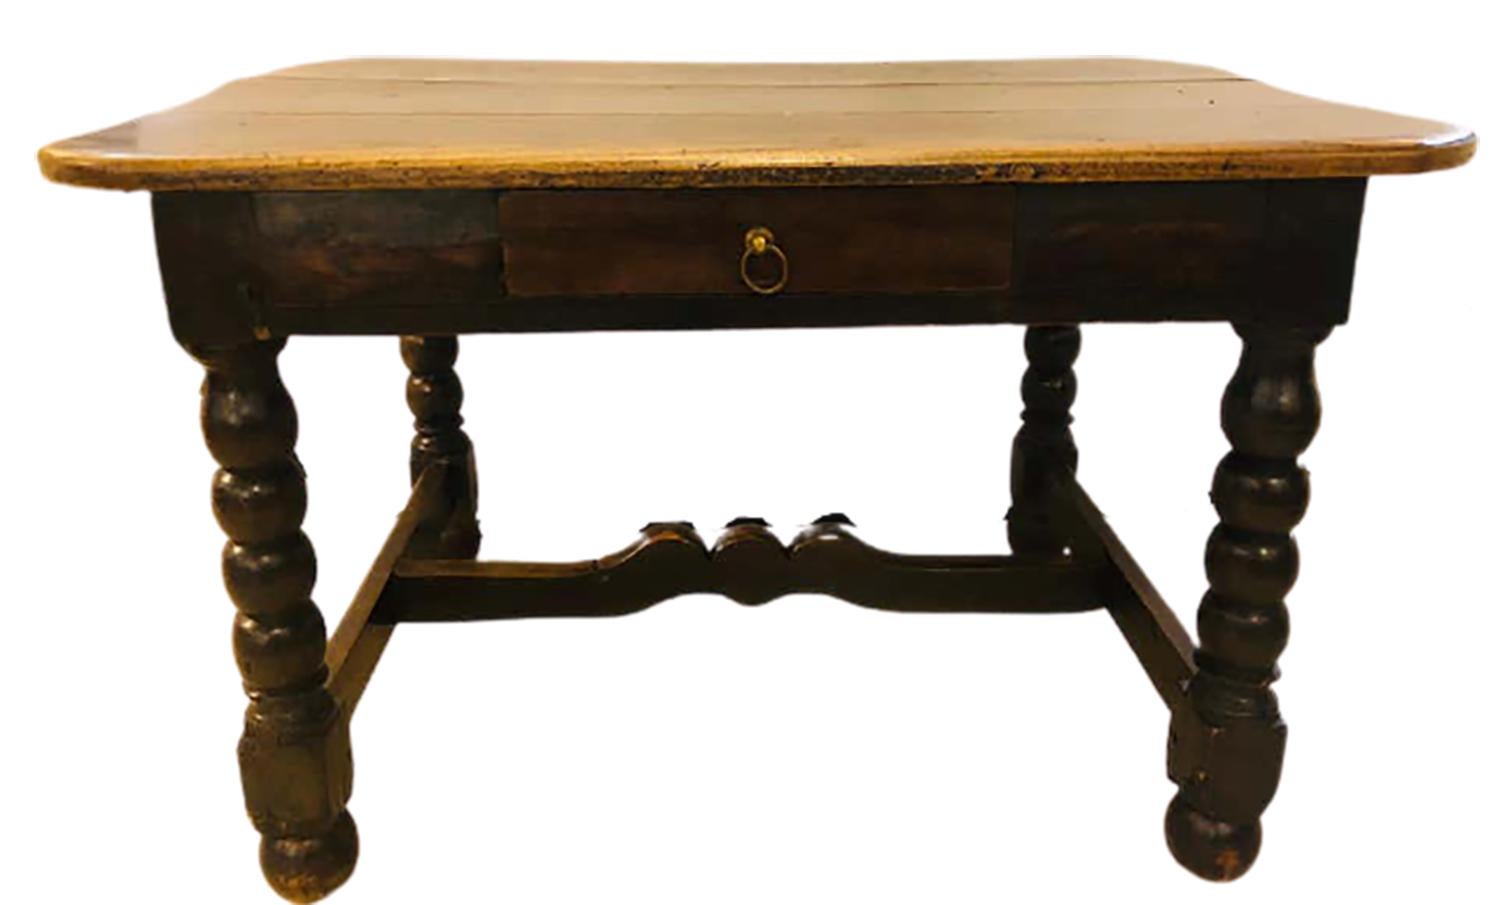 18th-19th century barley twist tavern table or writing desk.
Previously bought at Parc Monceau, Country French and Antiques.